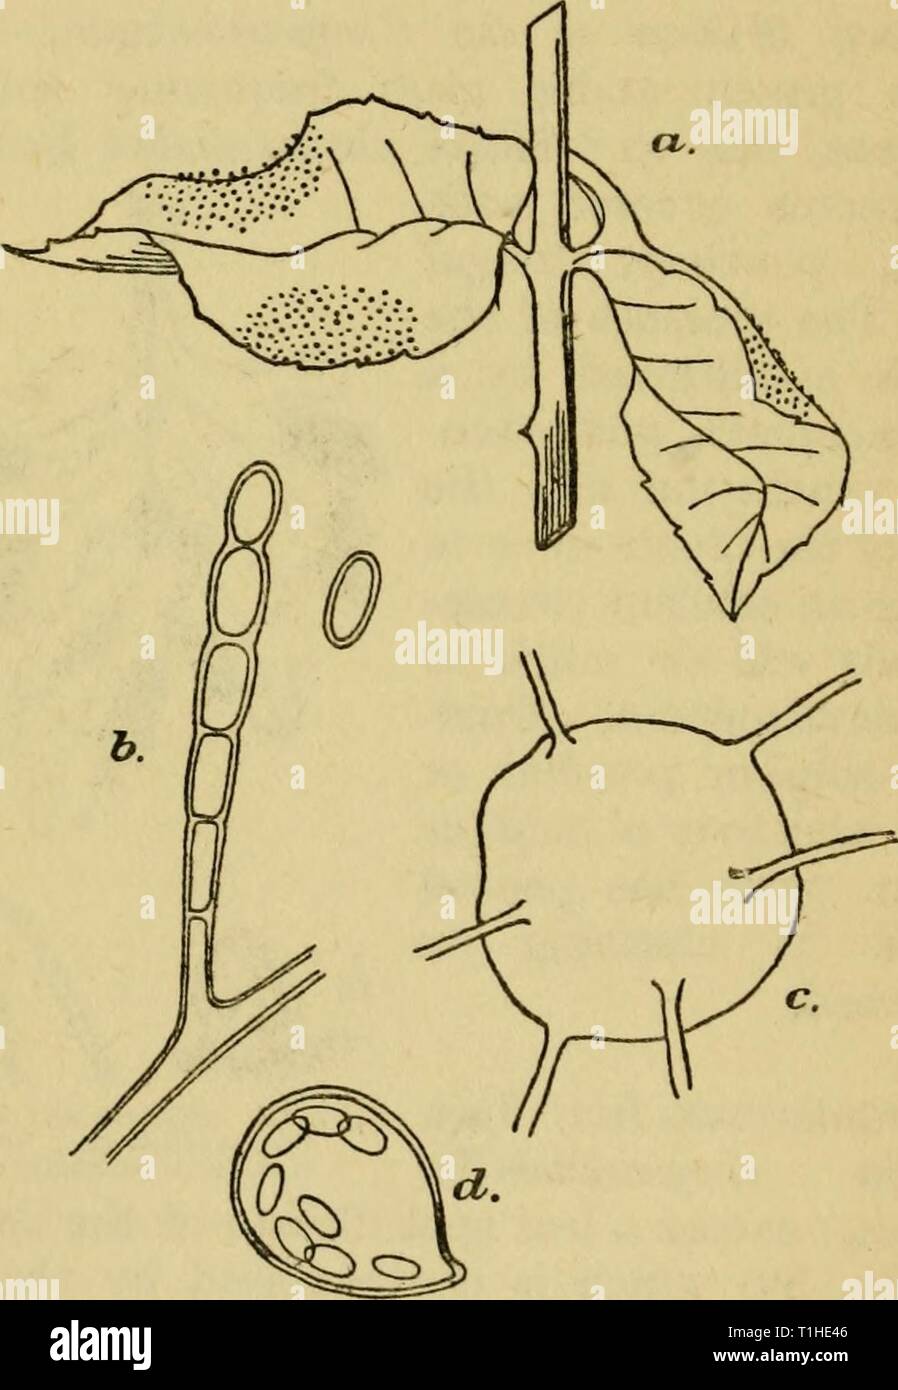 Diseases of glasshouse plants (1923) Diseases of glasshouse plants  diseasesofglassh1923bewl Year: 1923  110 DISEASES OF GLASSHOUSE PLANTS Downy Mildew of the Rose.—This disease, while common on glasshouse roses, is somewhat difficult to detect. Frequently young plants appear to lack vigour for no obvious reason, but a careful examination of the leaves reveals the presence of minute fungal filaments. The causal organism, Peronospora sparsa Berk., is capable    Fig. 31. Powdery mildew of the rose : («) Diseased leaves, (6) summer spores, (c) a perithecium, (d) ascus containing eight ascosporcs. Stock Photo